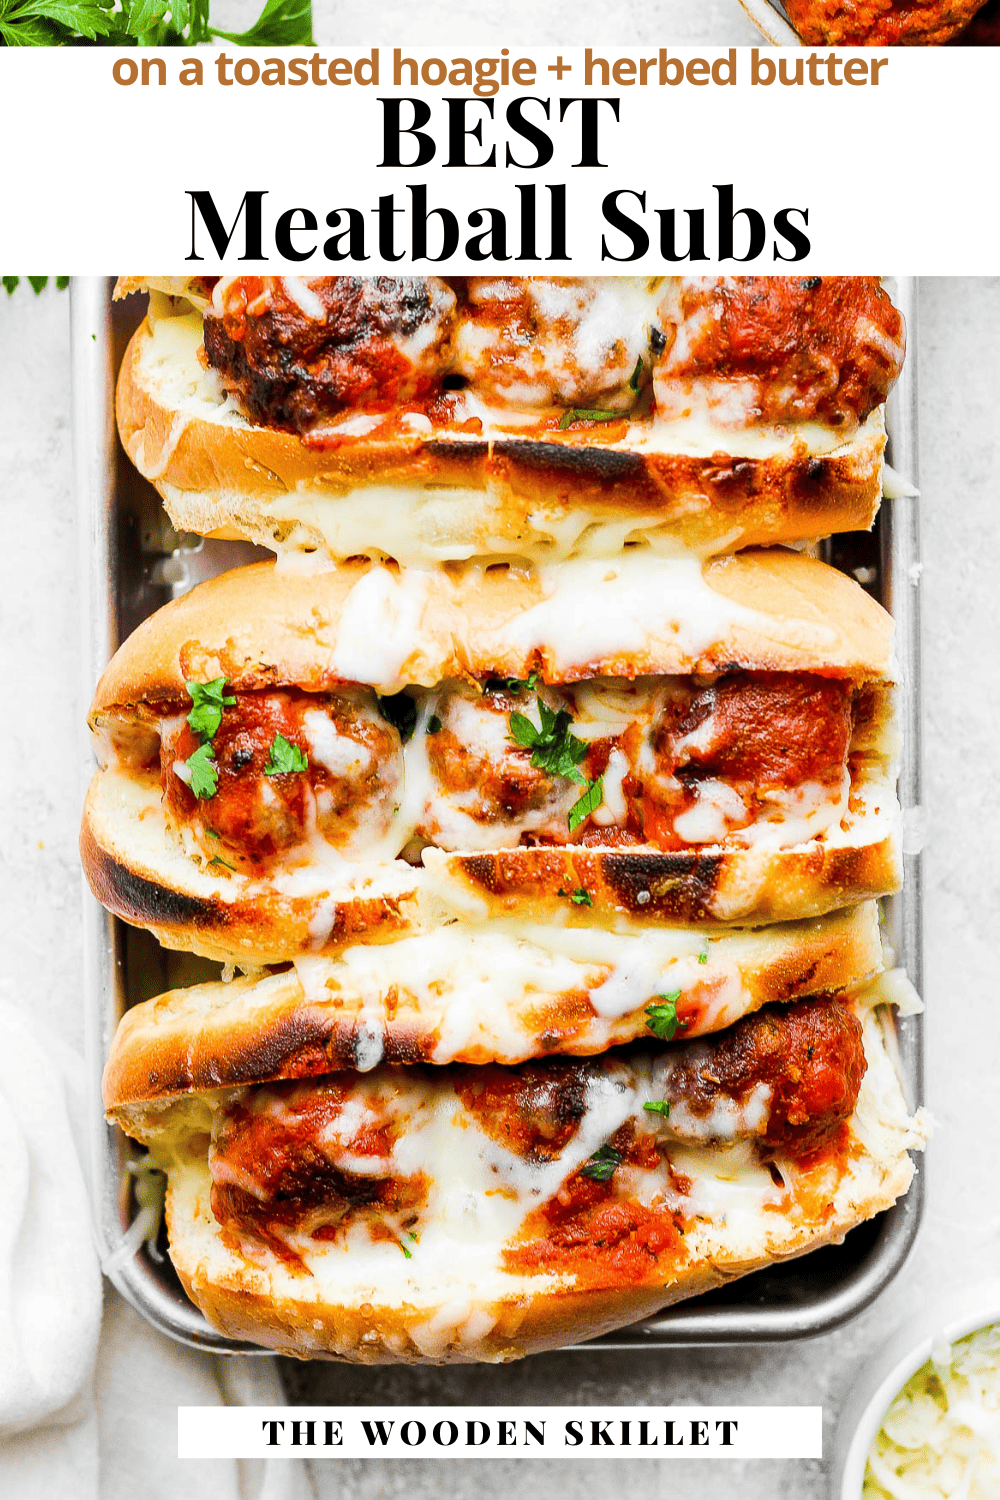 Pinterest image showing three meatball subs with the headline "Best meatball subs on a toasted hoagie + herbed butter".